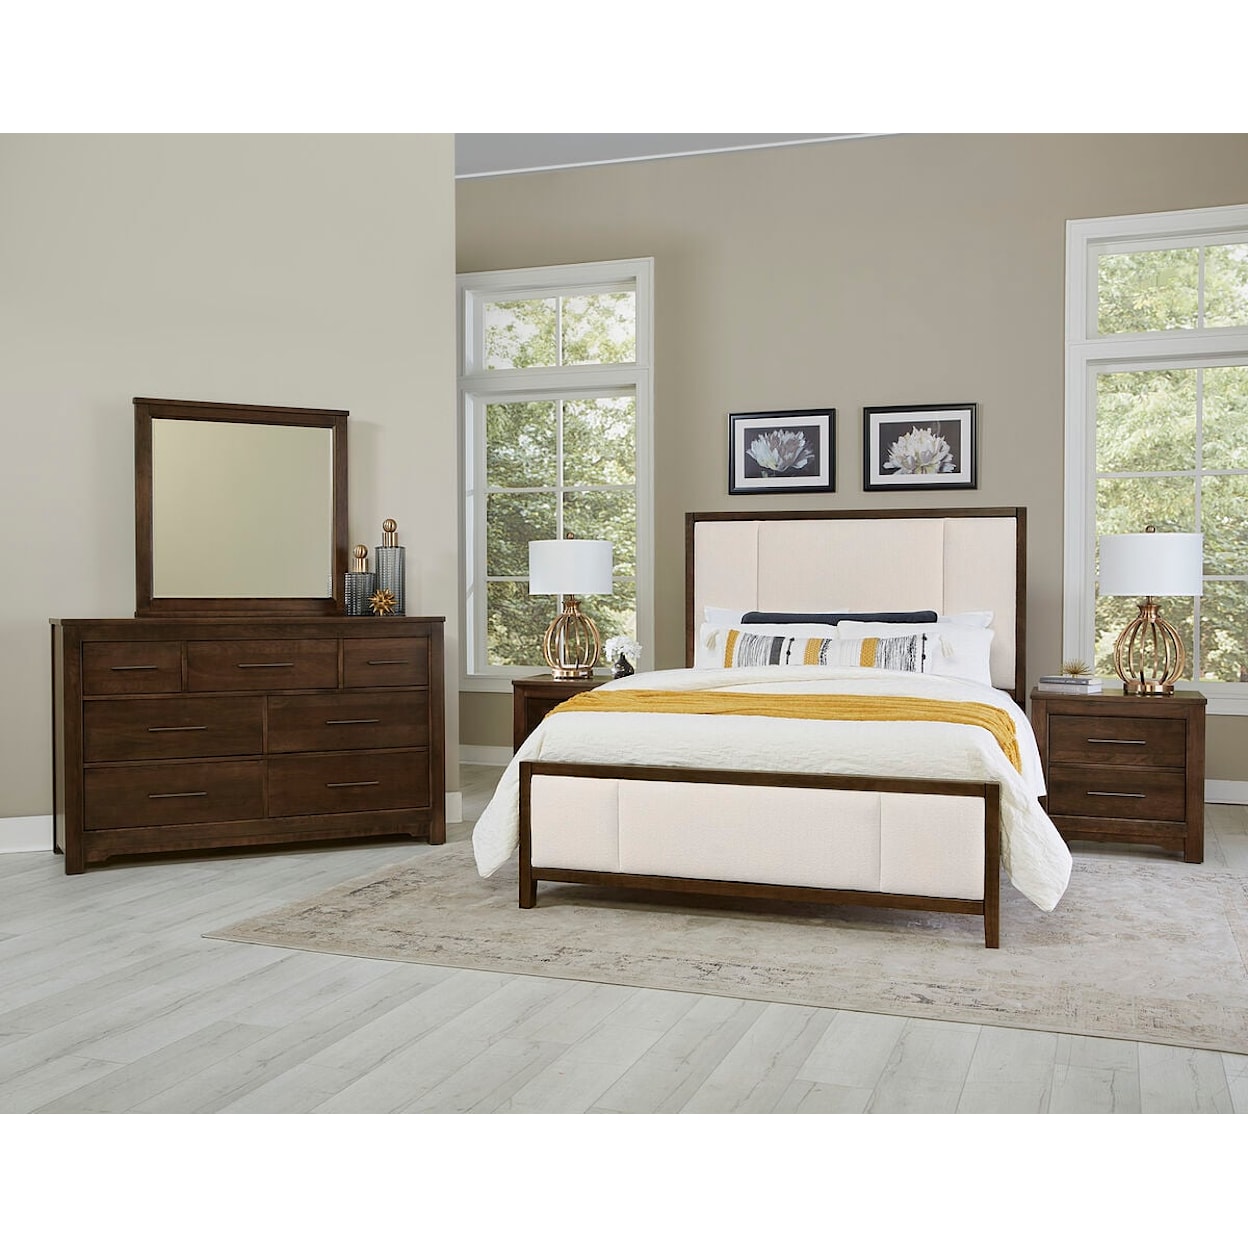 Artisan & Post Crafted Cherry Upholstered Panel Bed